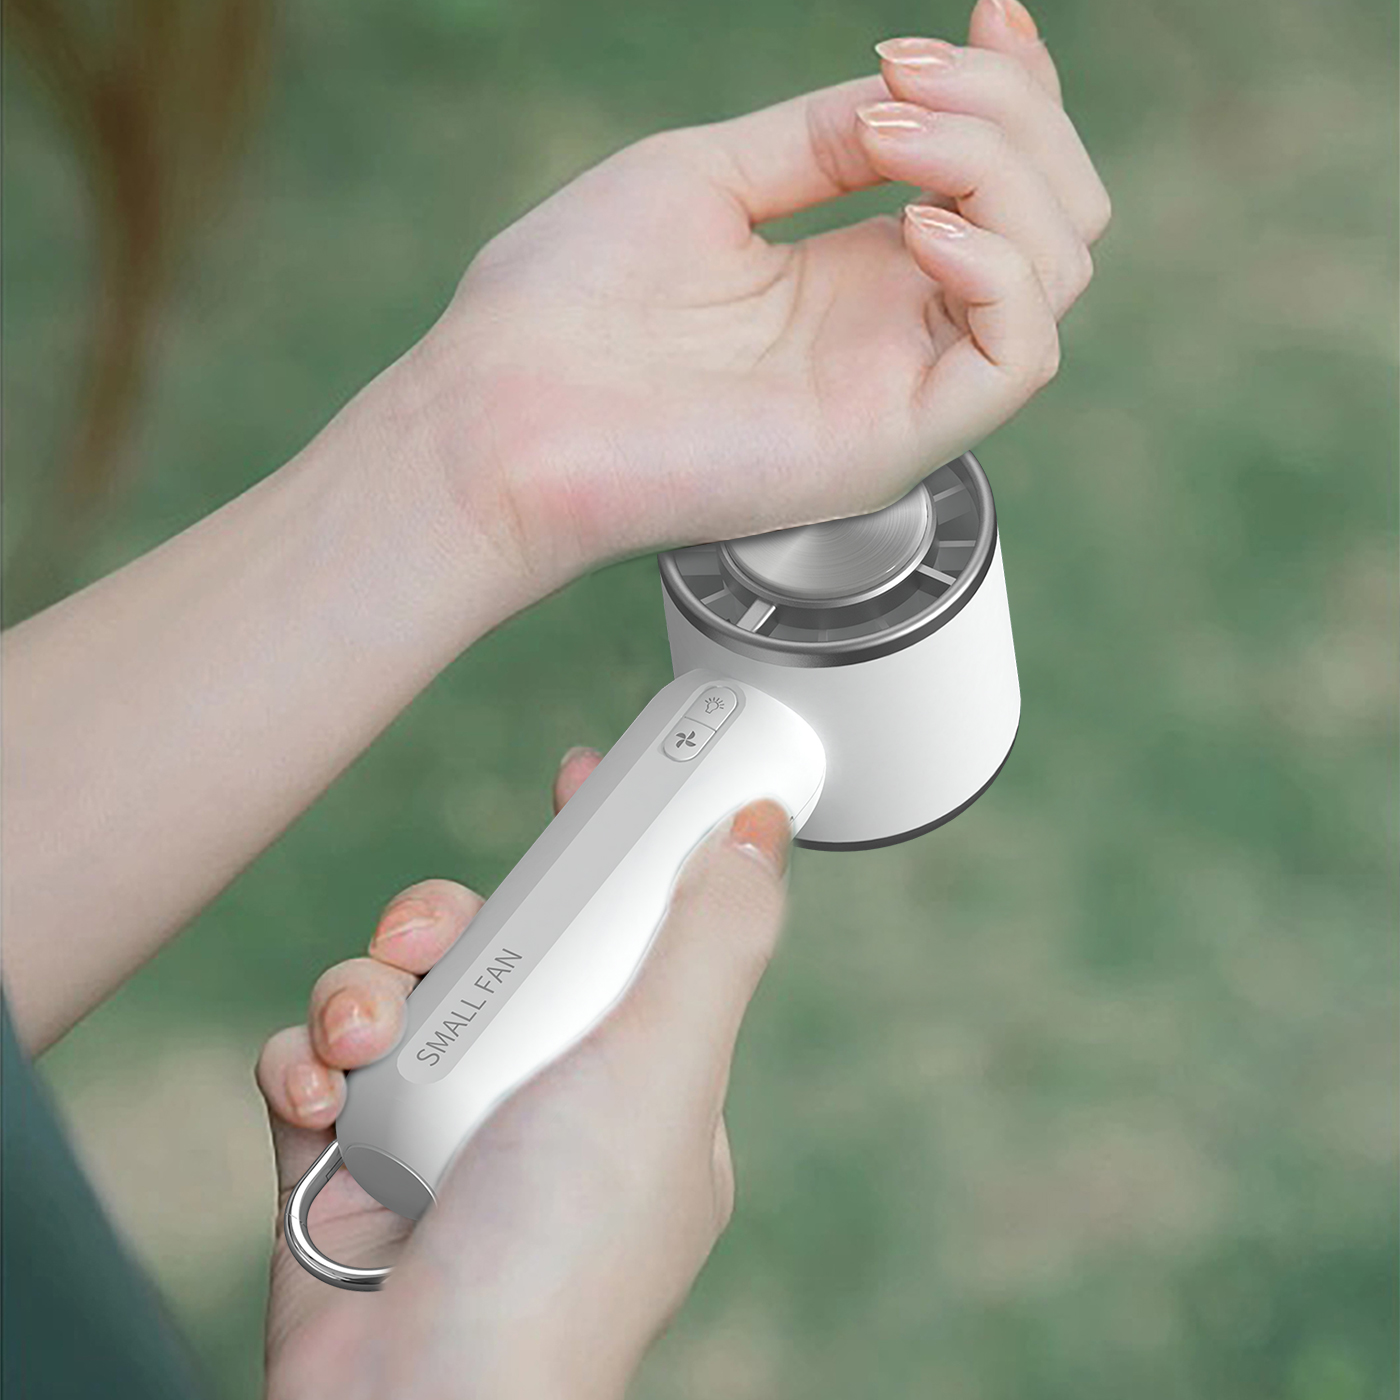 The Ultimate Companion for Your Outdoor Escapades: The Handheld Cooling Fan